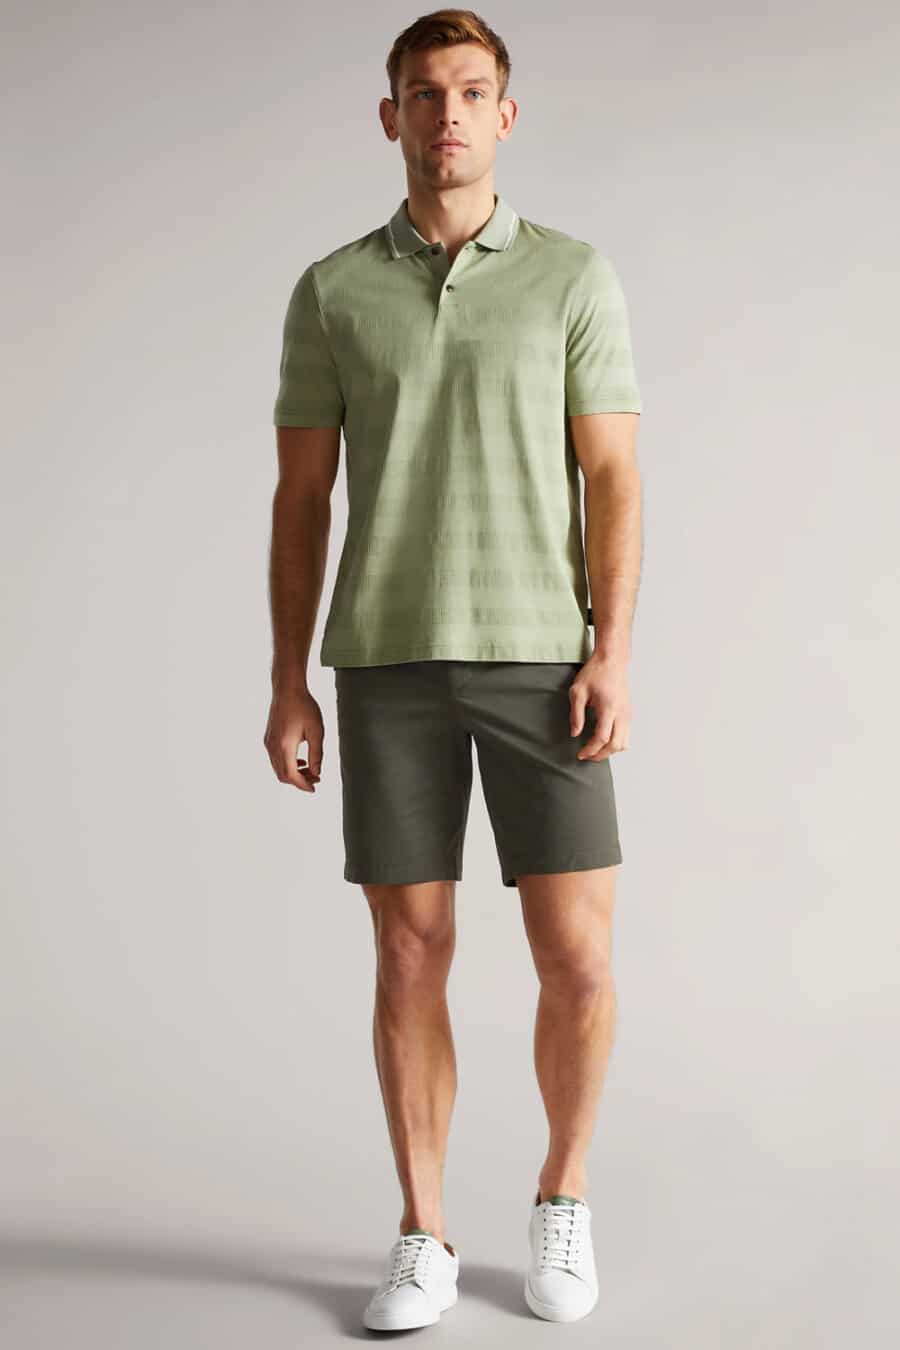 Men's dark green shorts, light green polo shirt and white sneakers outfit